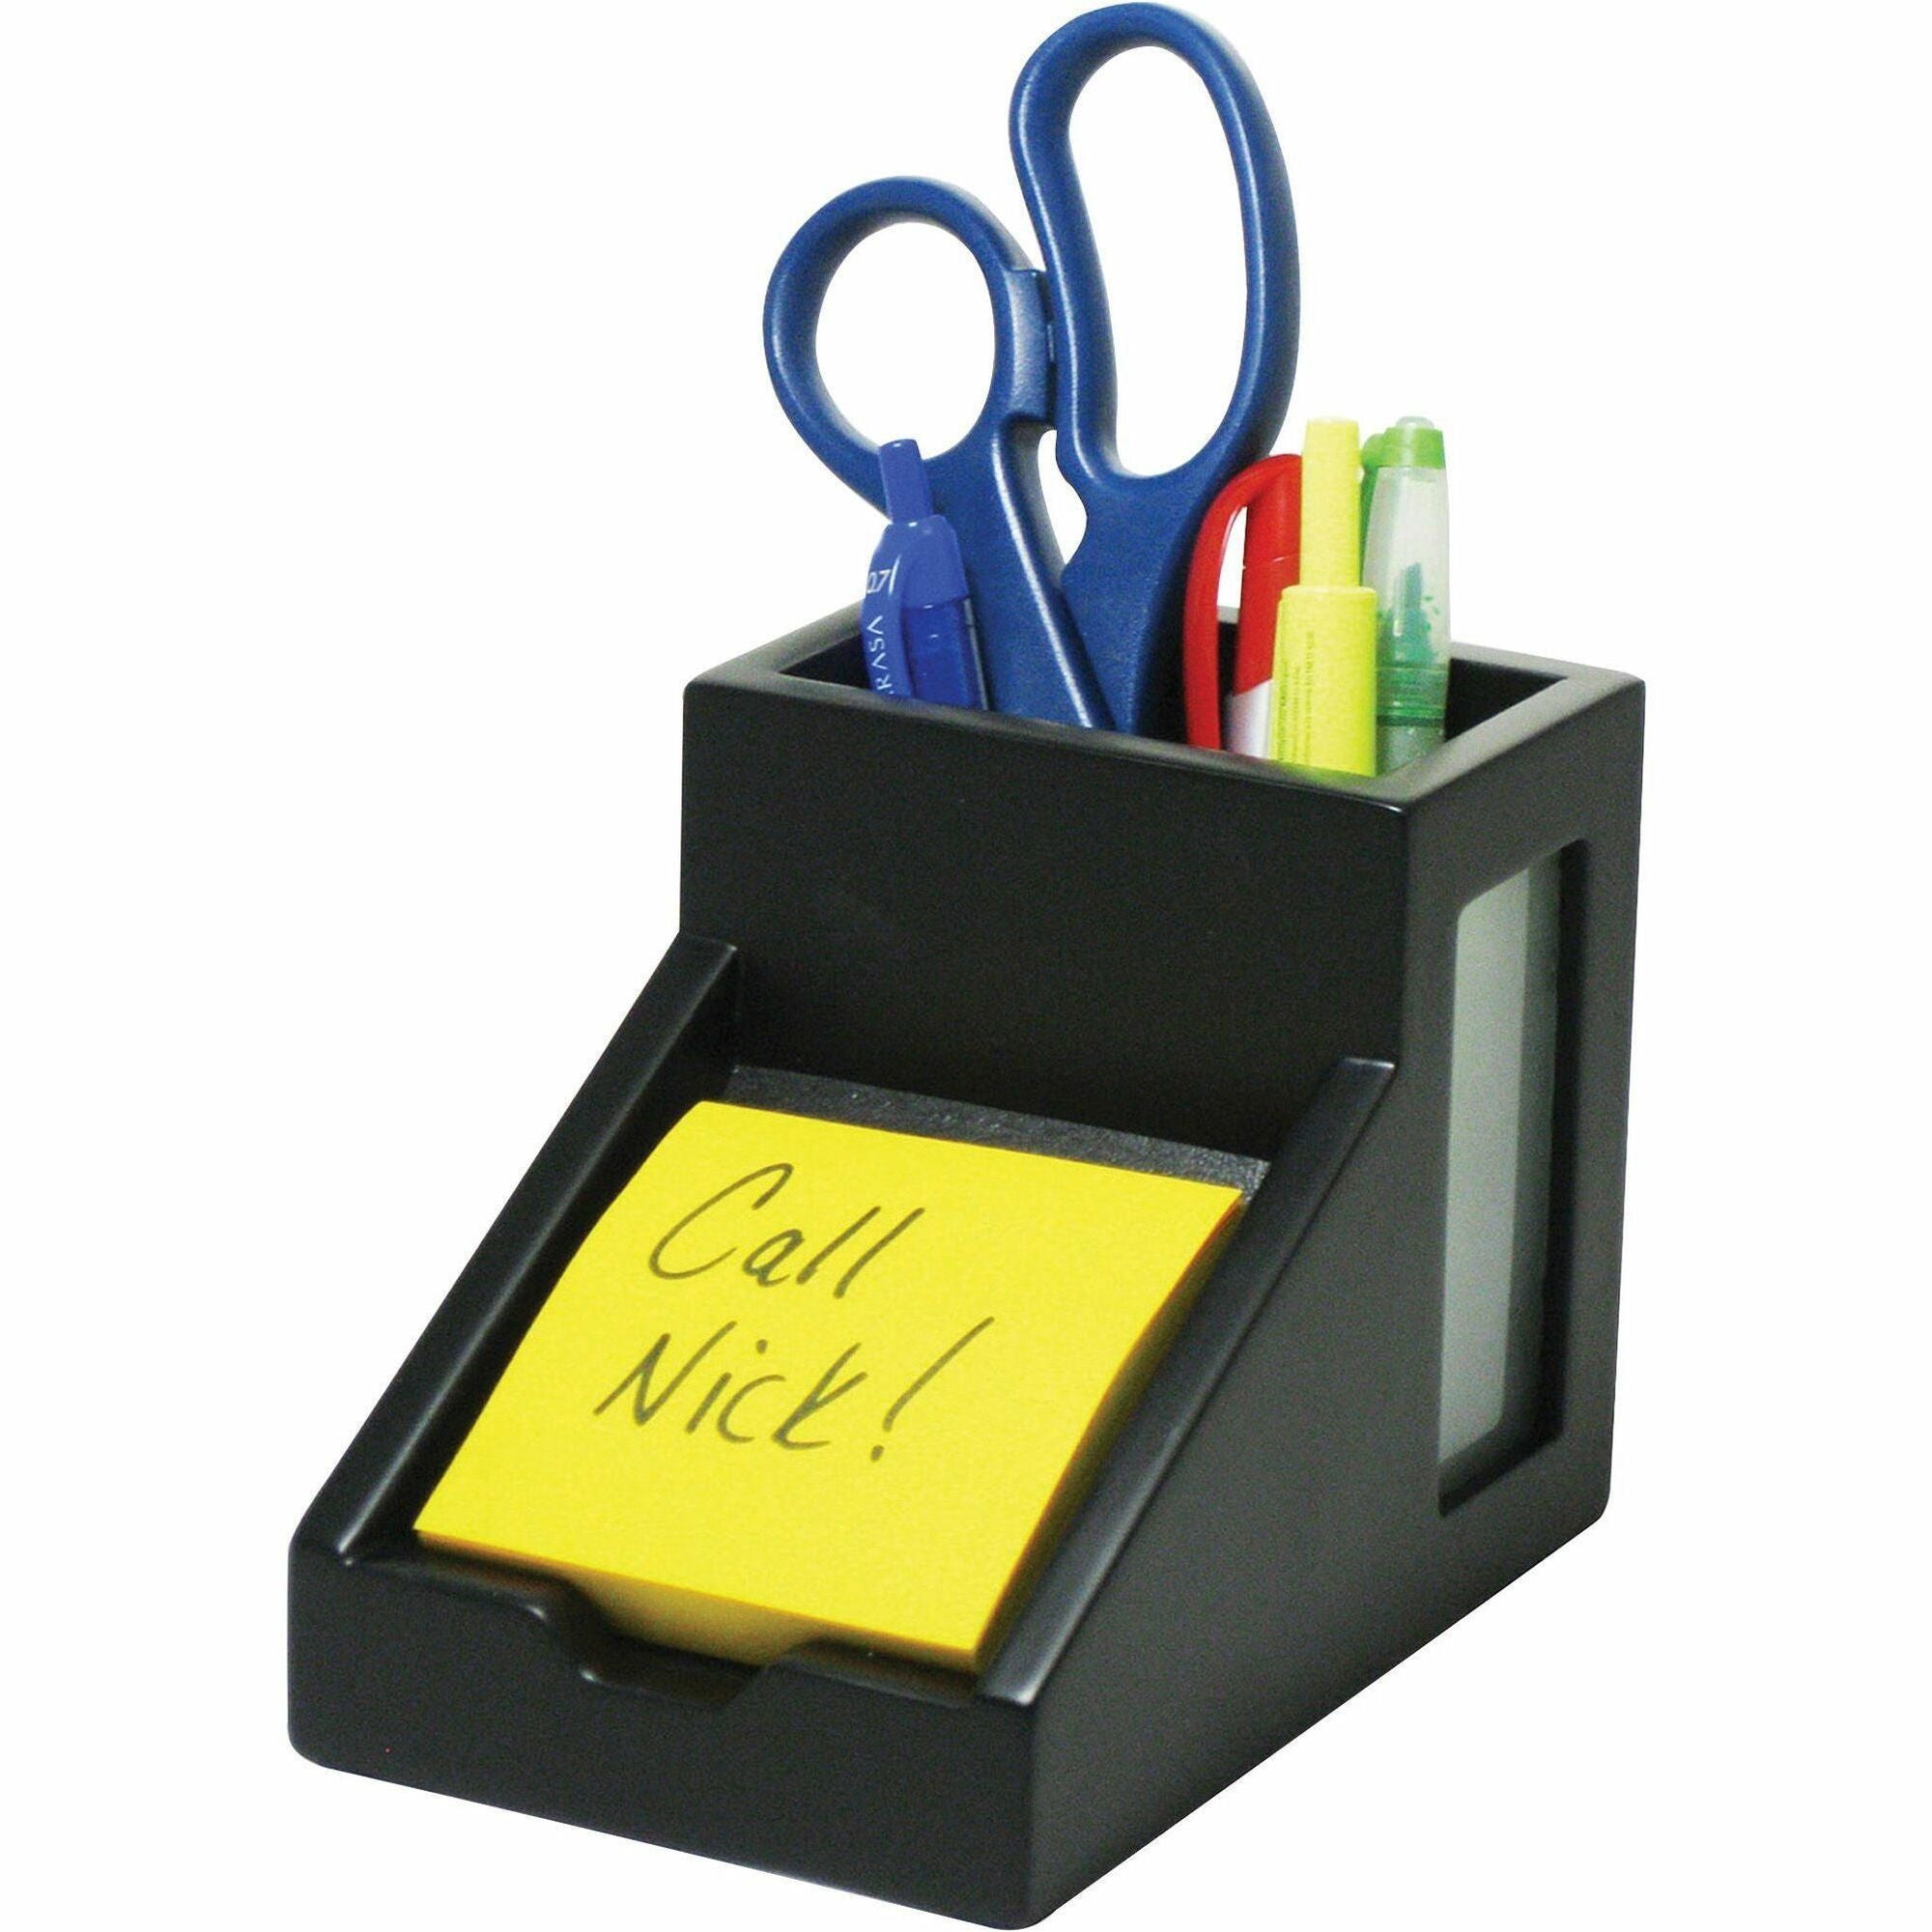 Victor 9505-5 Midnight Black Pencil Cup with Note Holder - 4.4" x 5.6" x 3.9" - Wood, Glass - 1 Each - Black - 